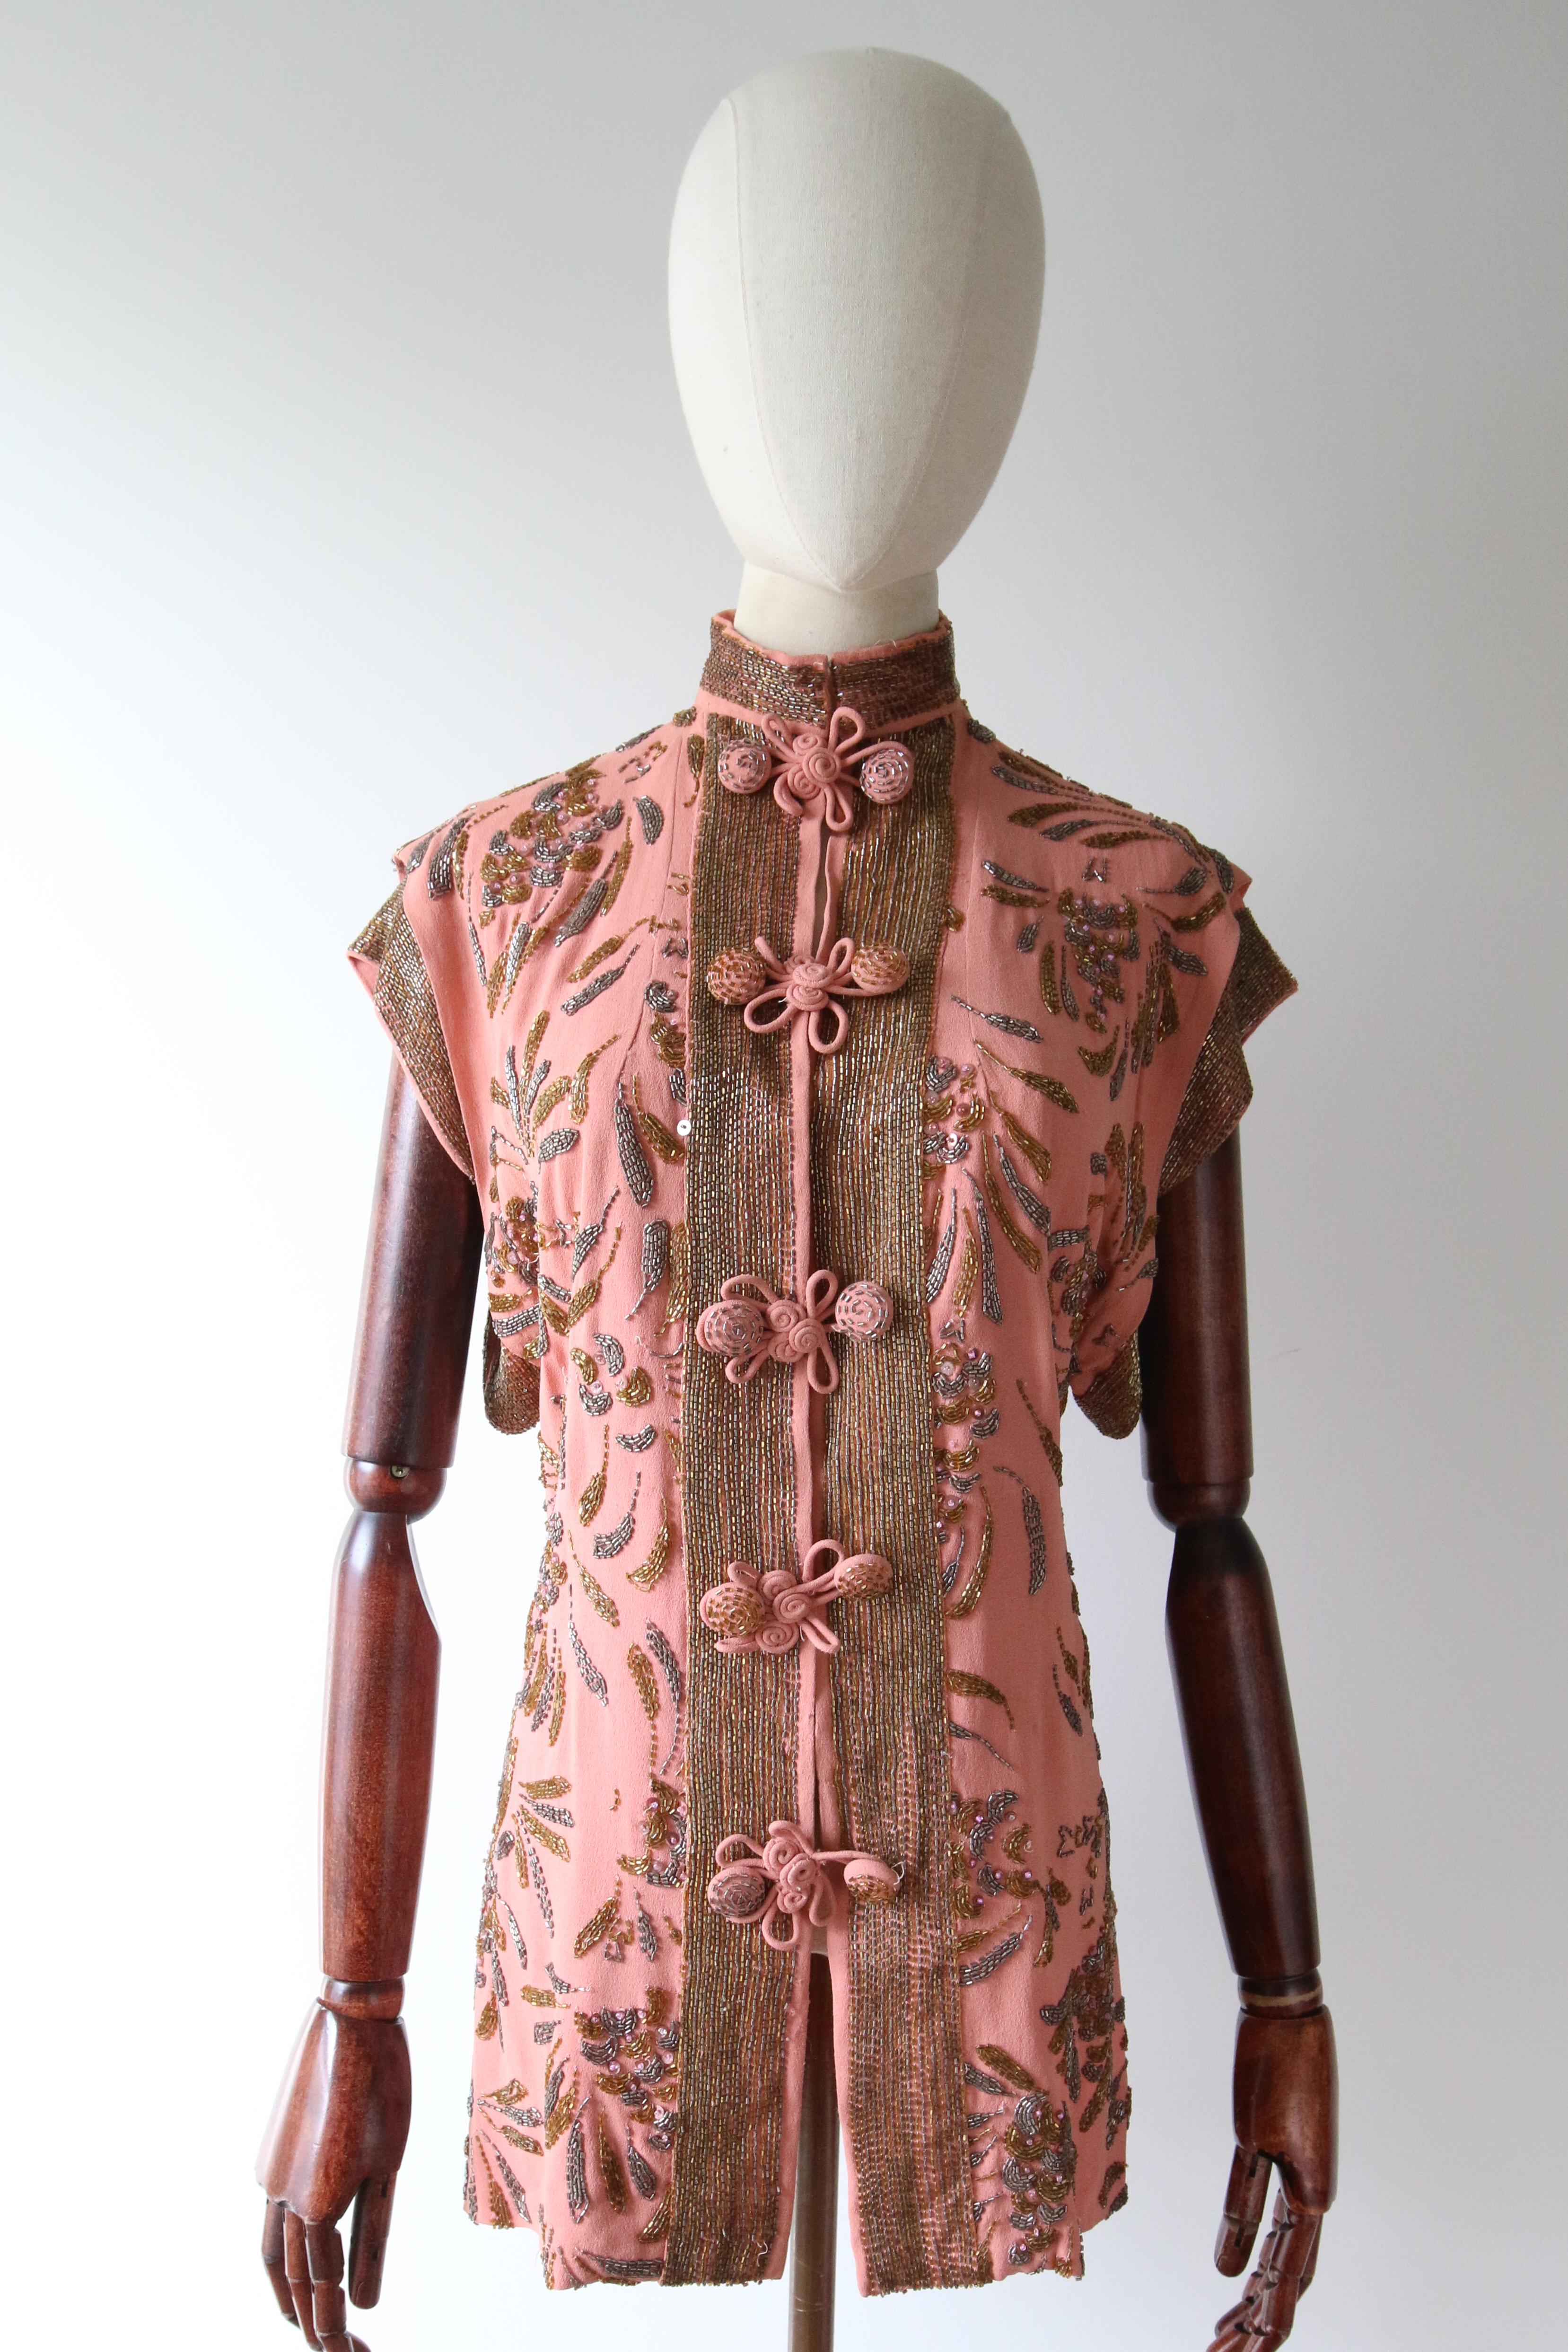 A beauty to behold. This original 1940's crepe silk blouse, rendered in the most incredible blush silk, and embellished with ornate beadwork in shades of gold and gunmetal grey, with sparkling pink sequins and pink glass beads, in a floral design